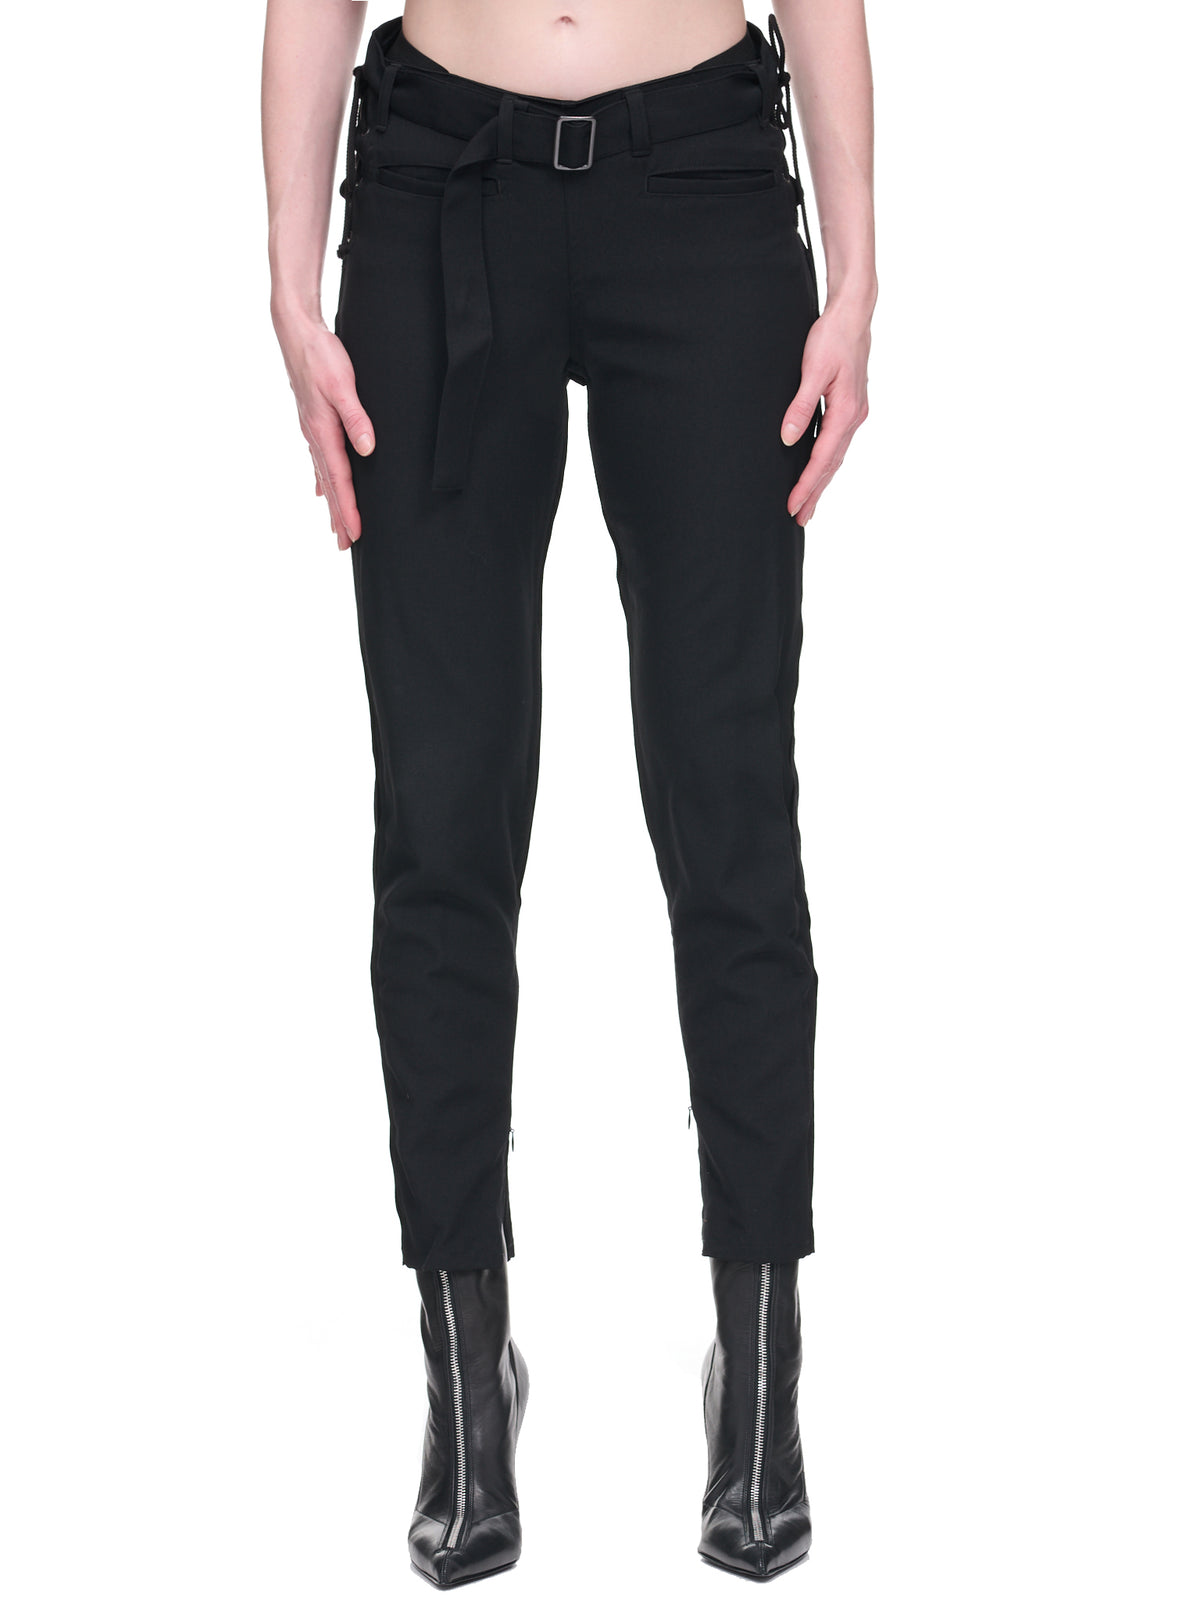 Lace-Up Trousers (FE-P10-100-1-BLACK)